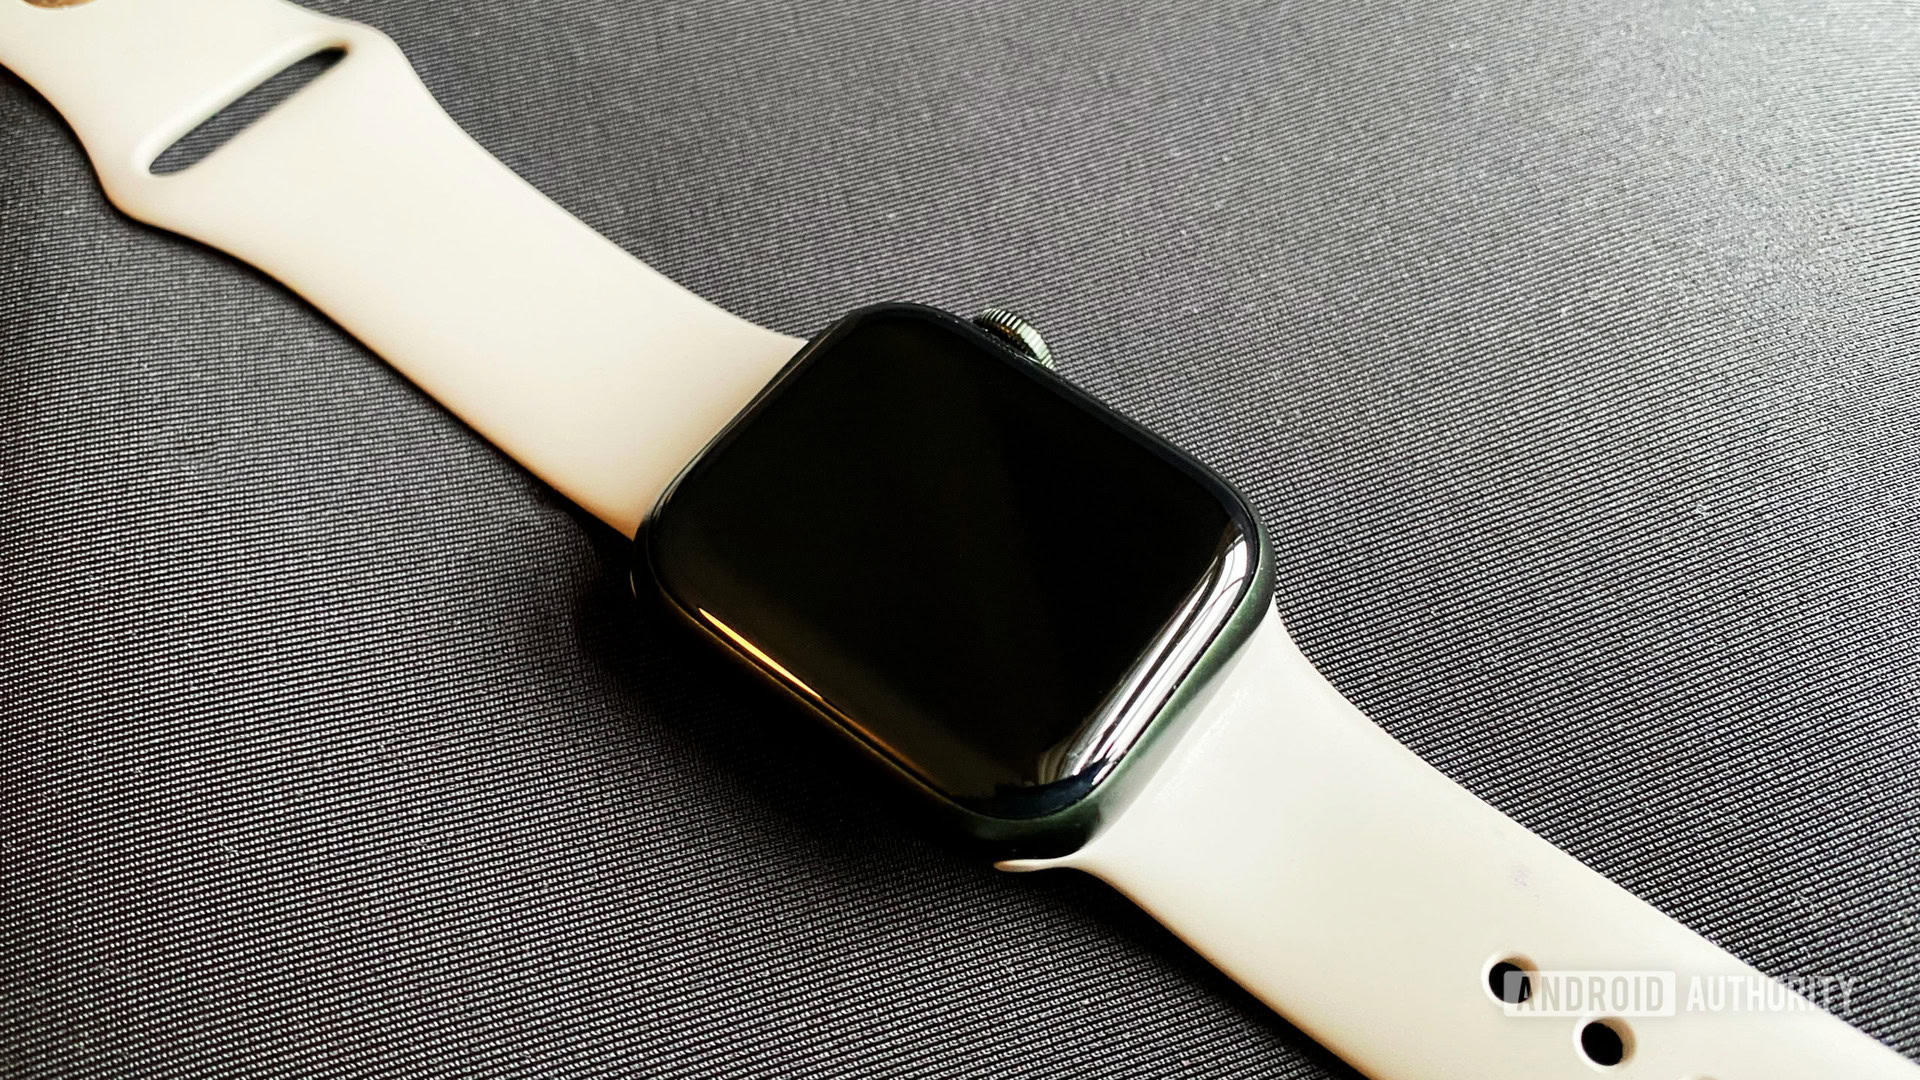 The Apple Watch Series 7 has a screen that sits on an inactive black mat.